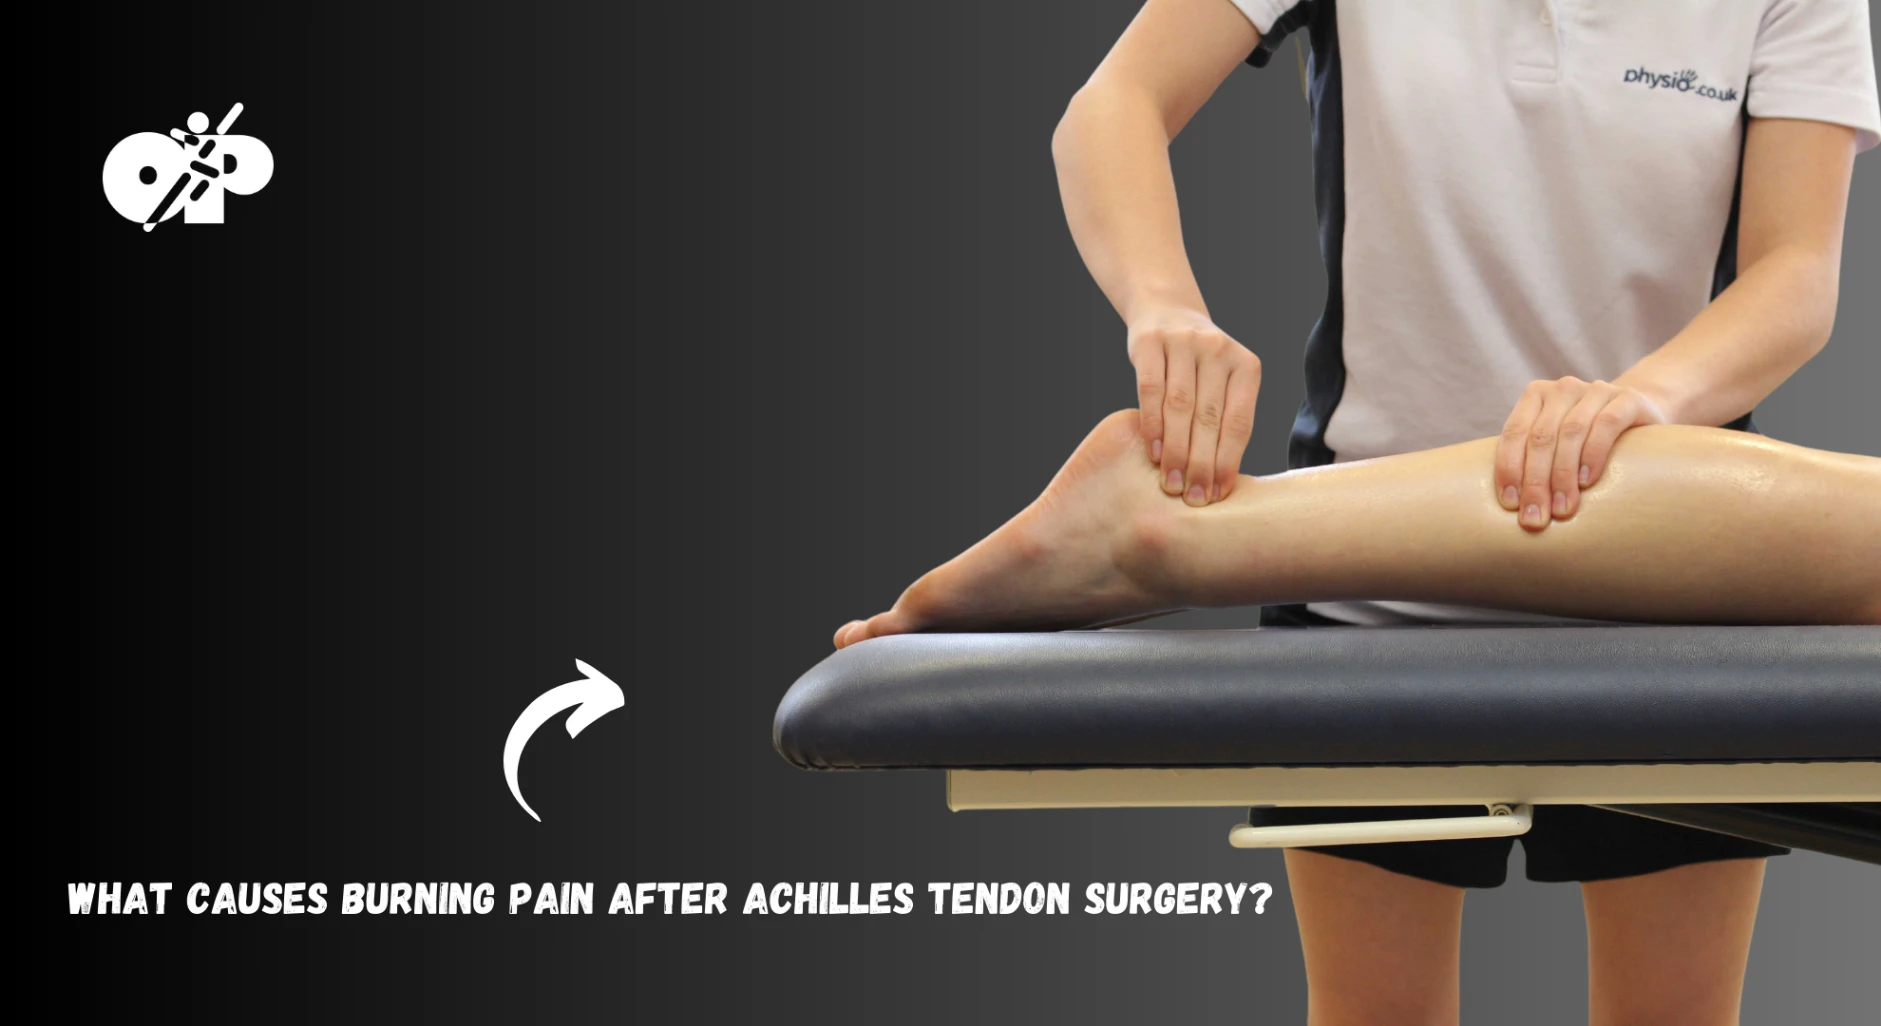 37. What Causes Burning Pain After Achilles Tendon Surgery